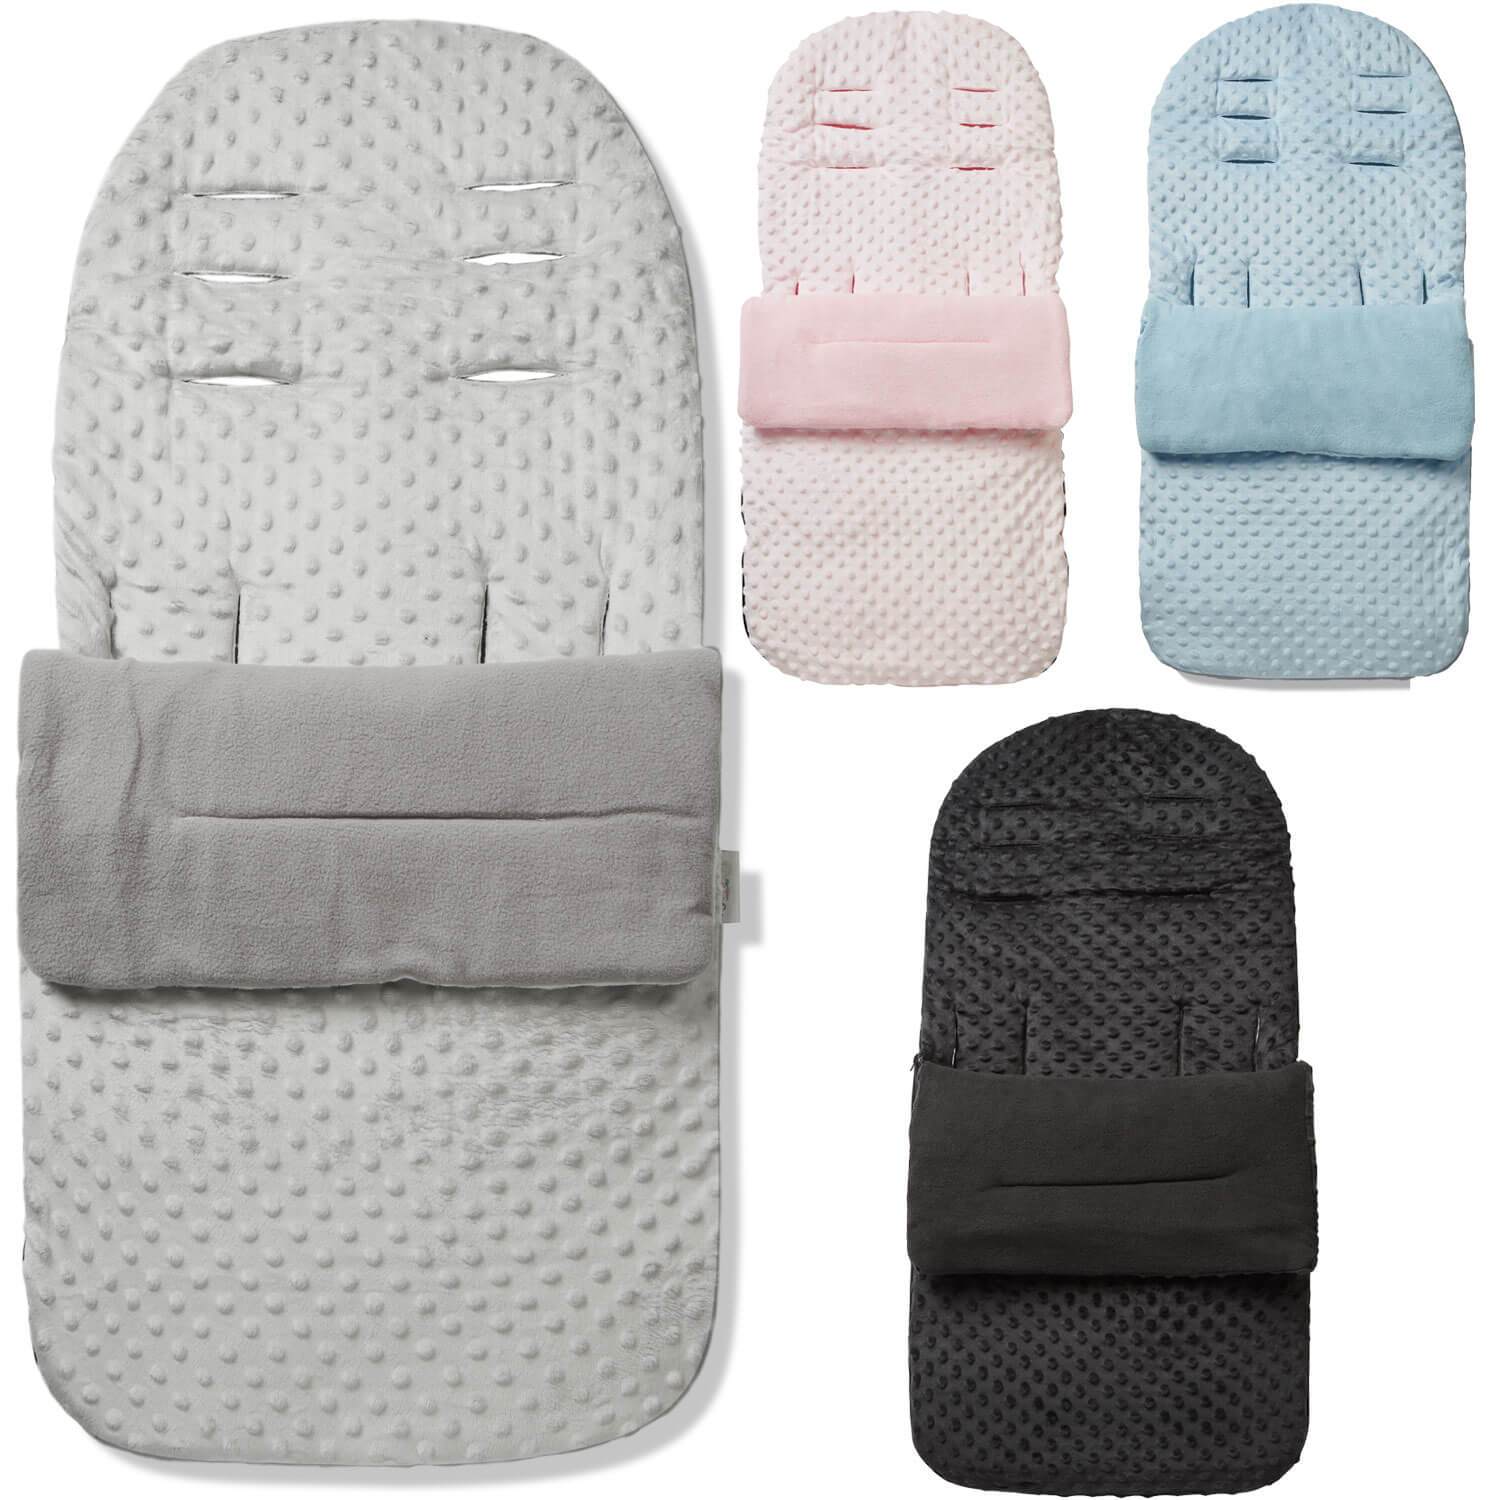 Dimple Footmuff / Cosy Toes Compatible with Cosatto - For Your Little One